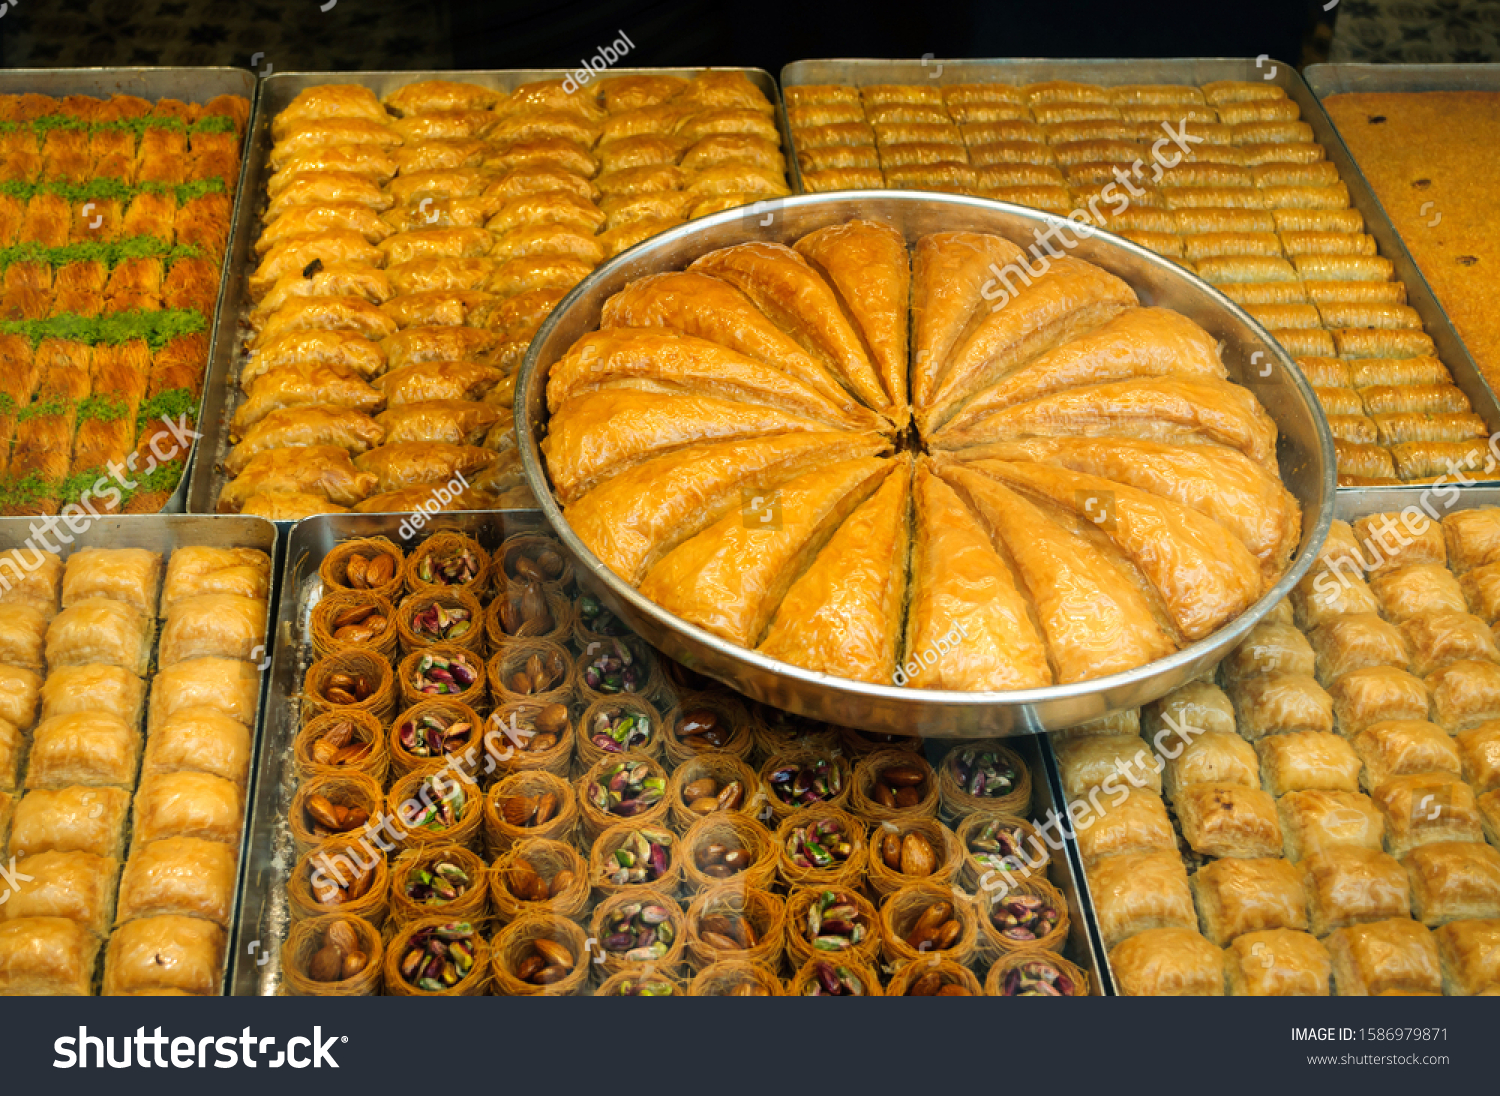 stock-photo-baklava-traditional-turkish-delicacy-in-the-street-market-of-istanbul-turkey-1586979871